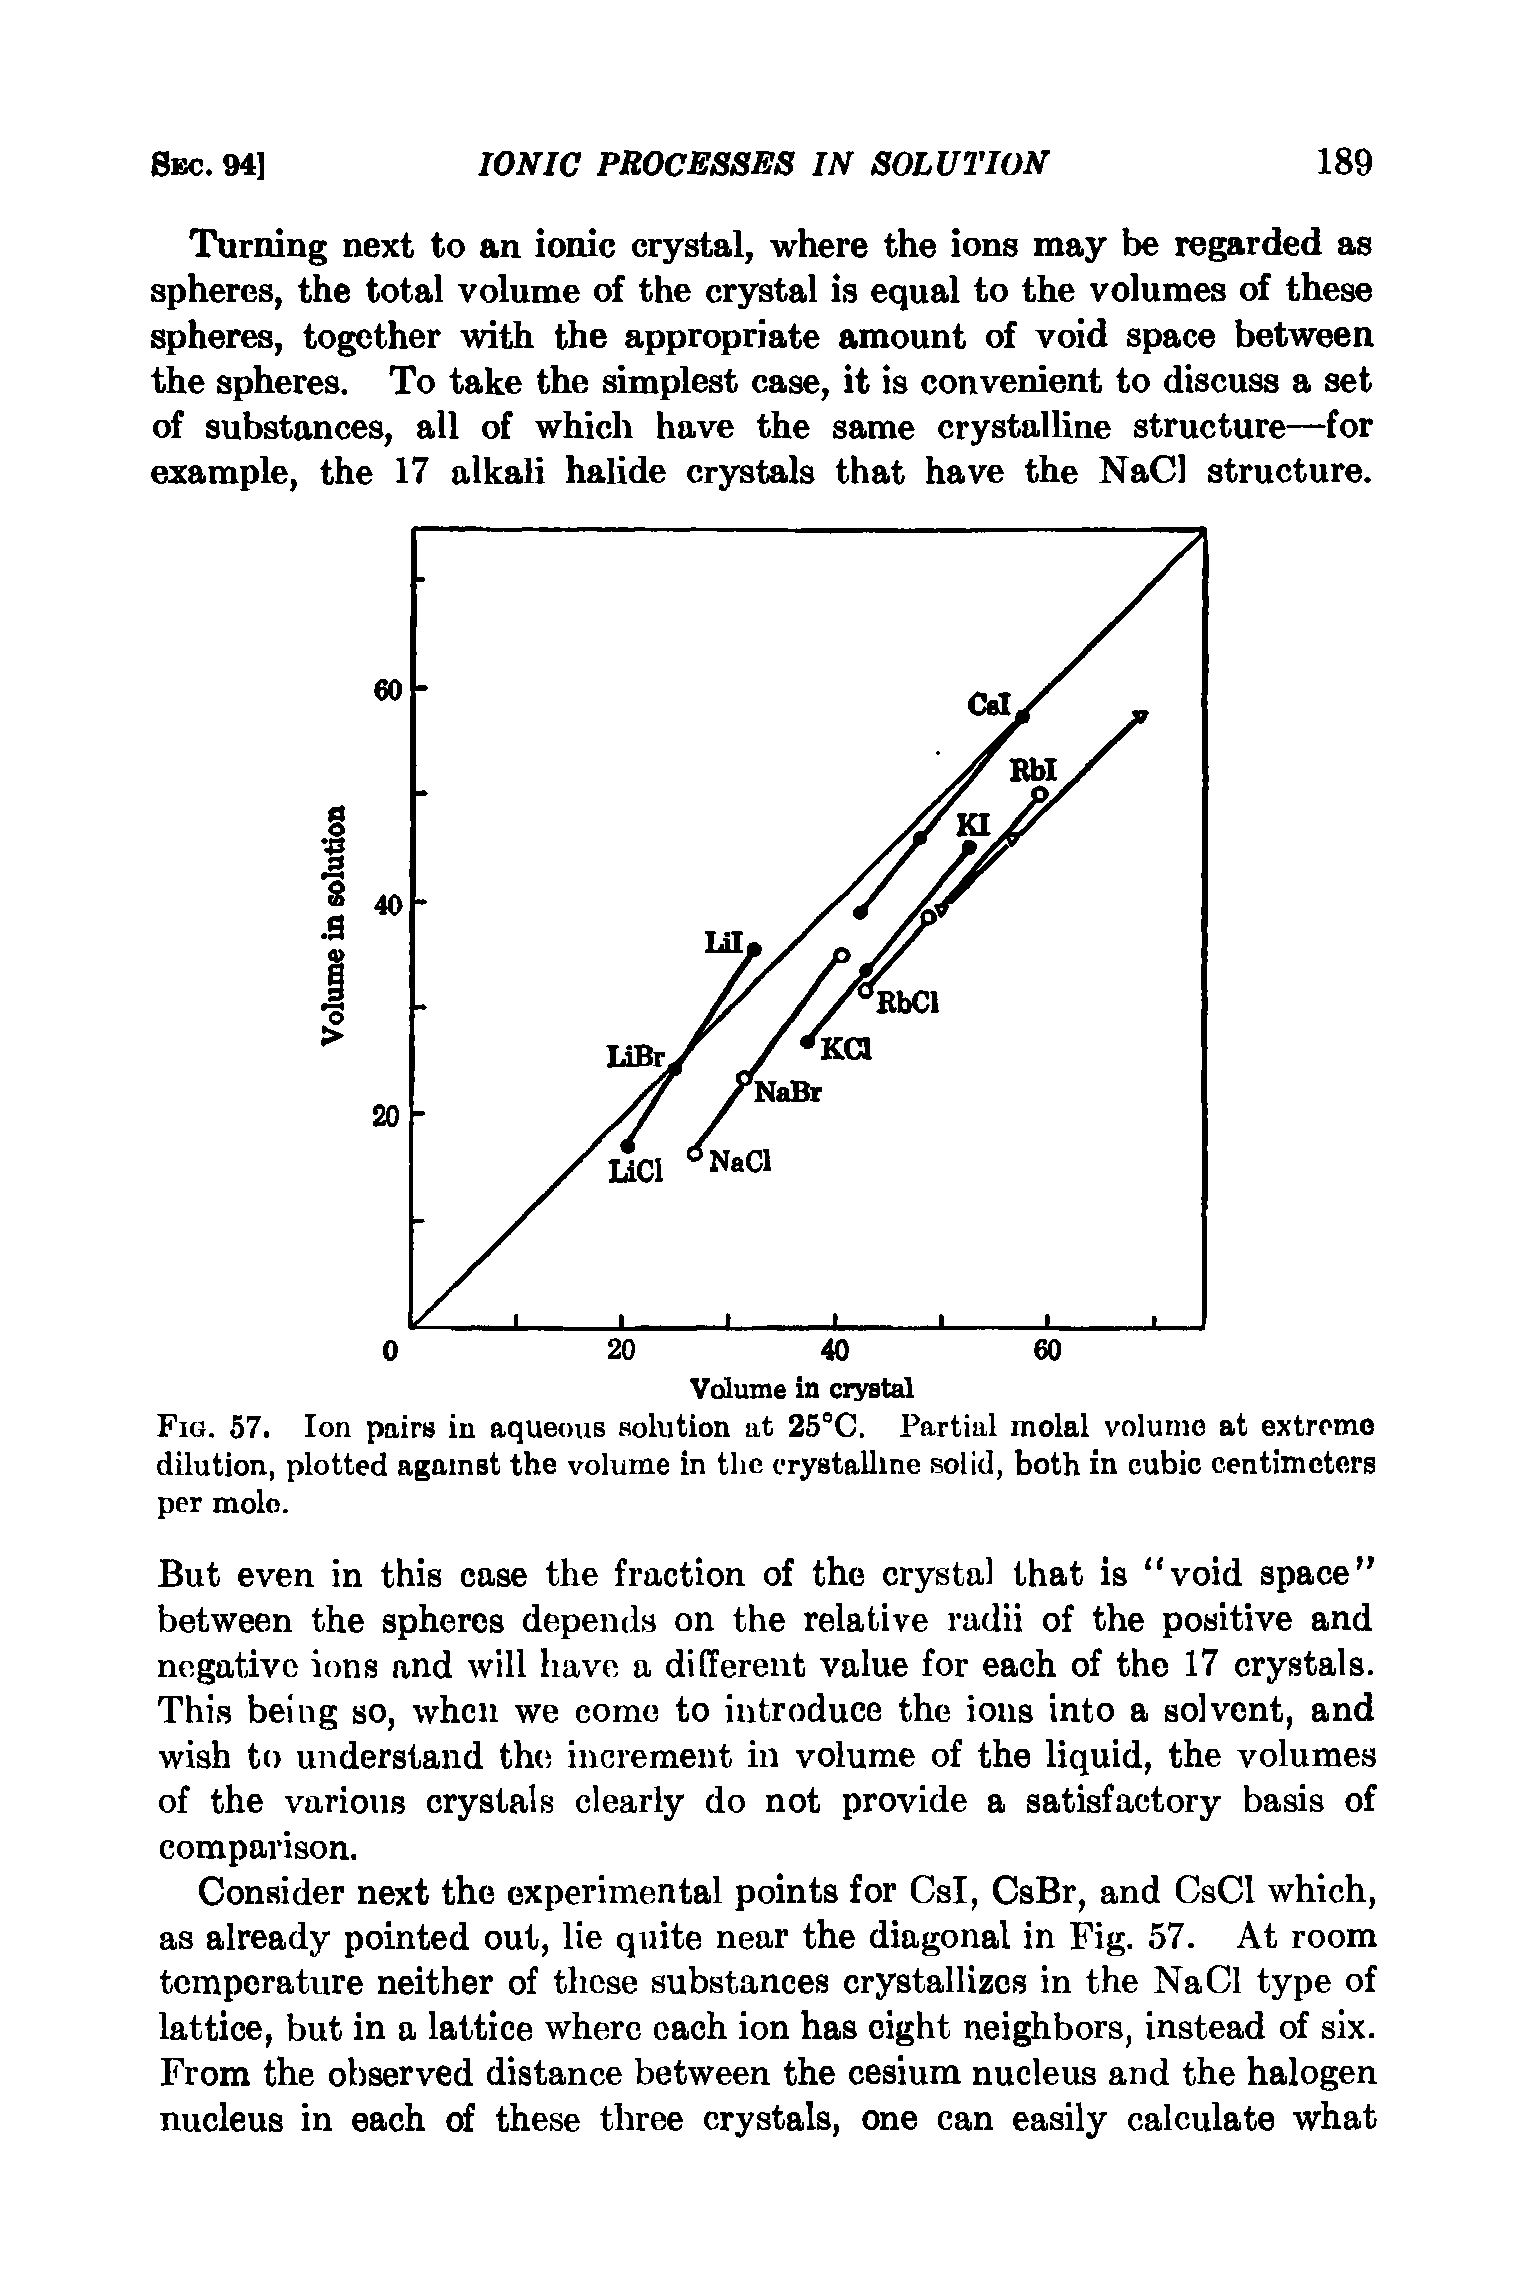 Fig. 57. Ion pairs in aqueous solution at 25°C. Partial molal volume at extreme dilution, plotted against the volume in the crystalline solid, both in cubic centimeters per mole.